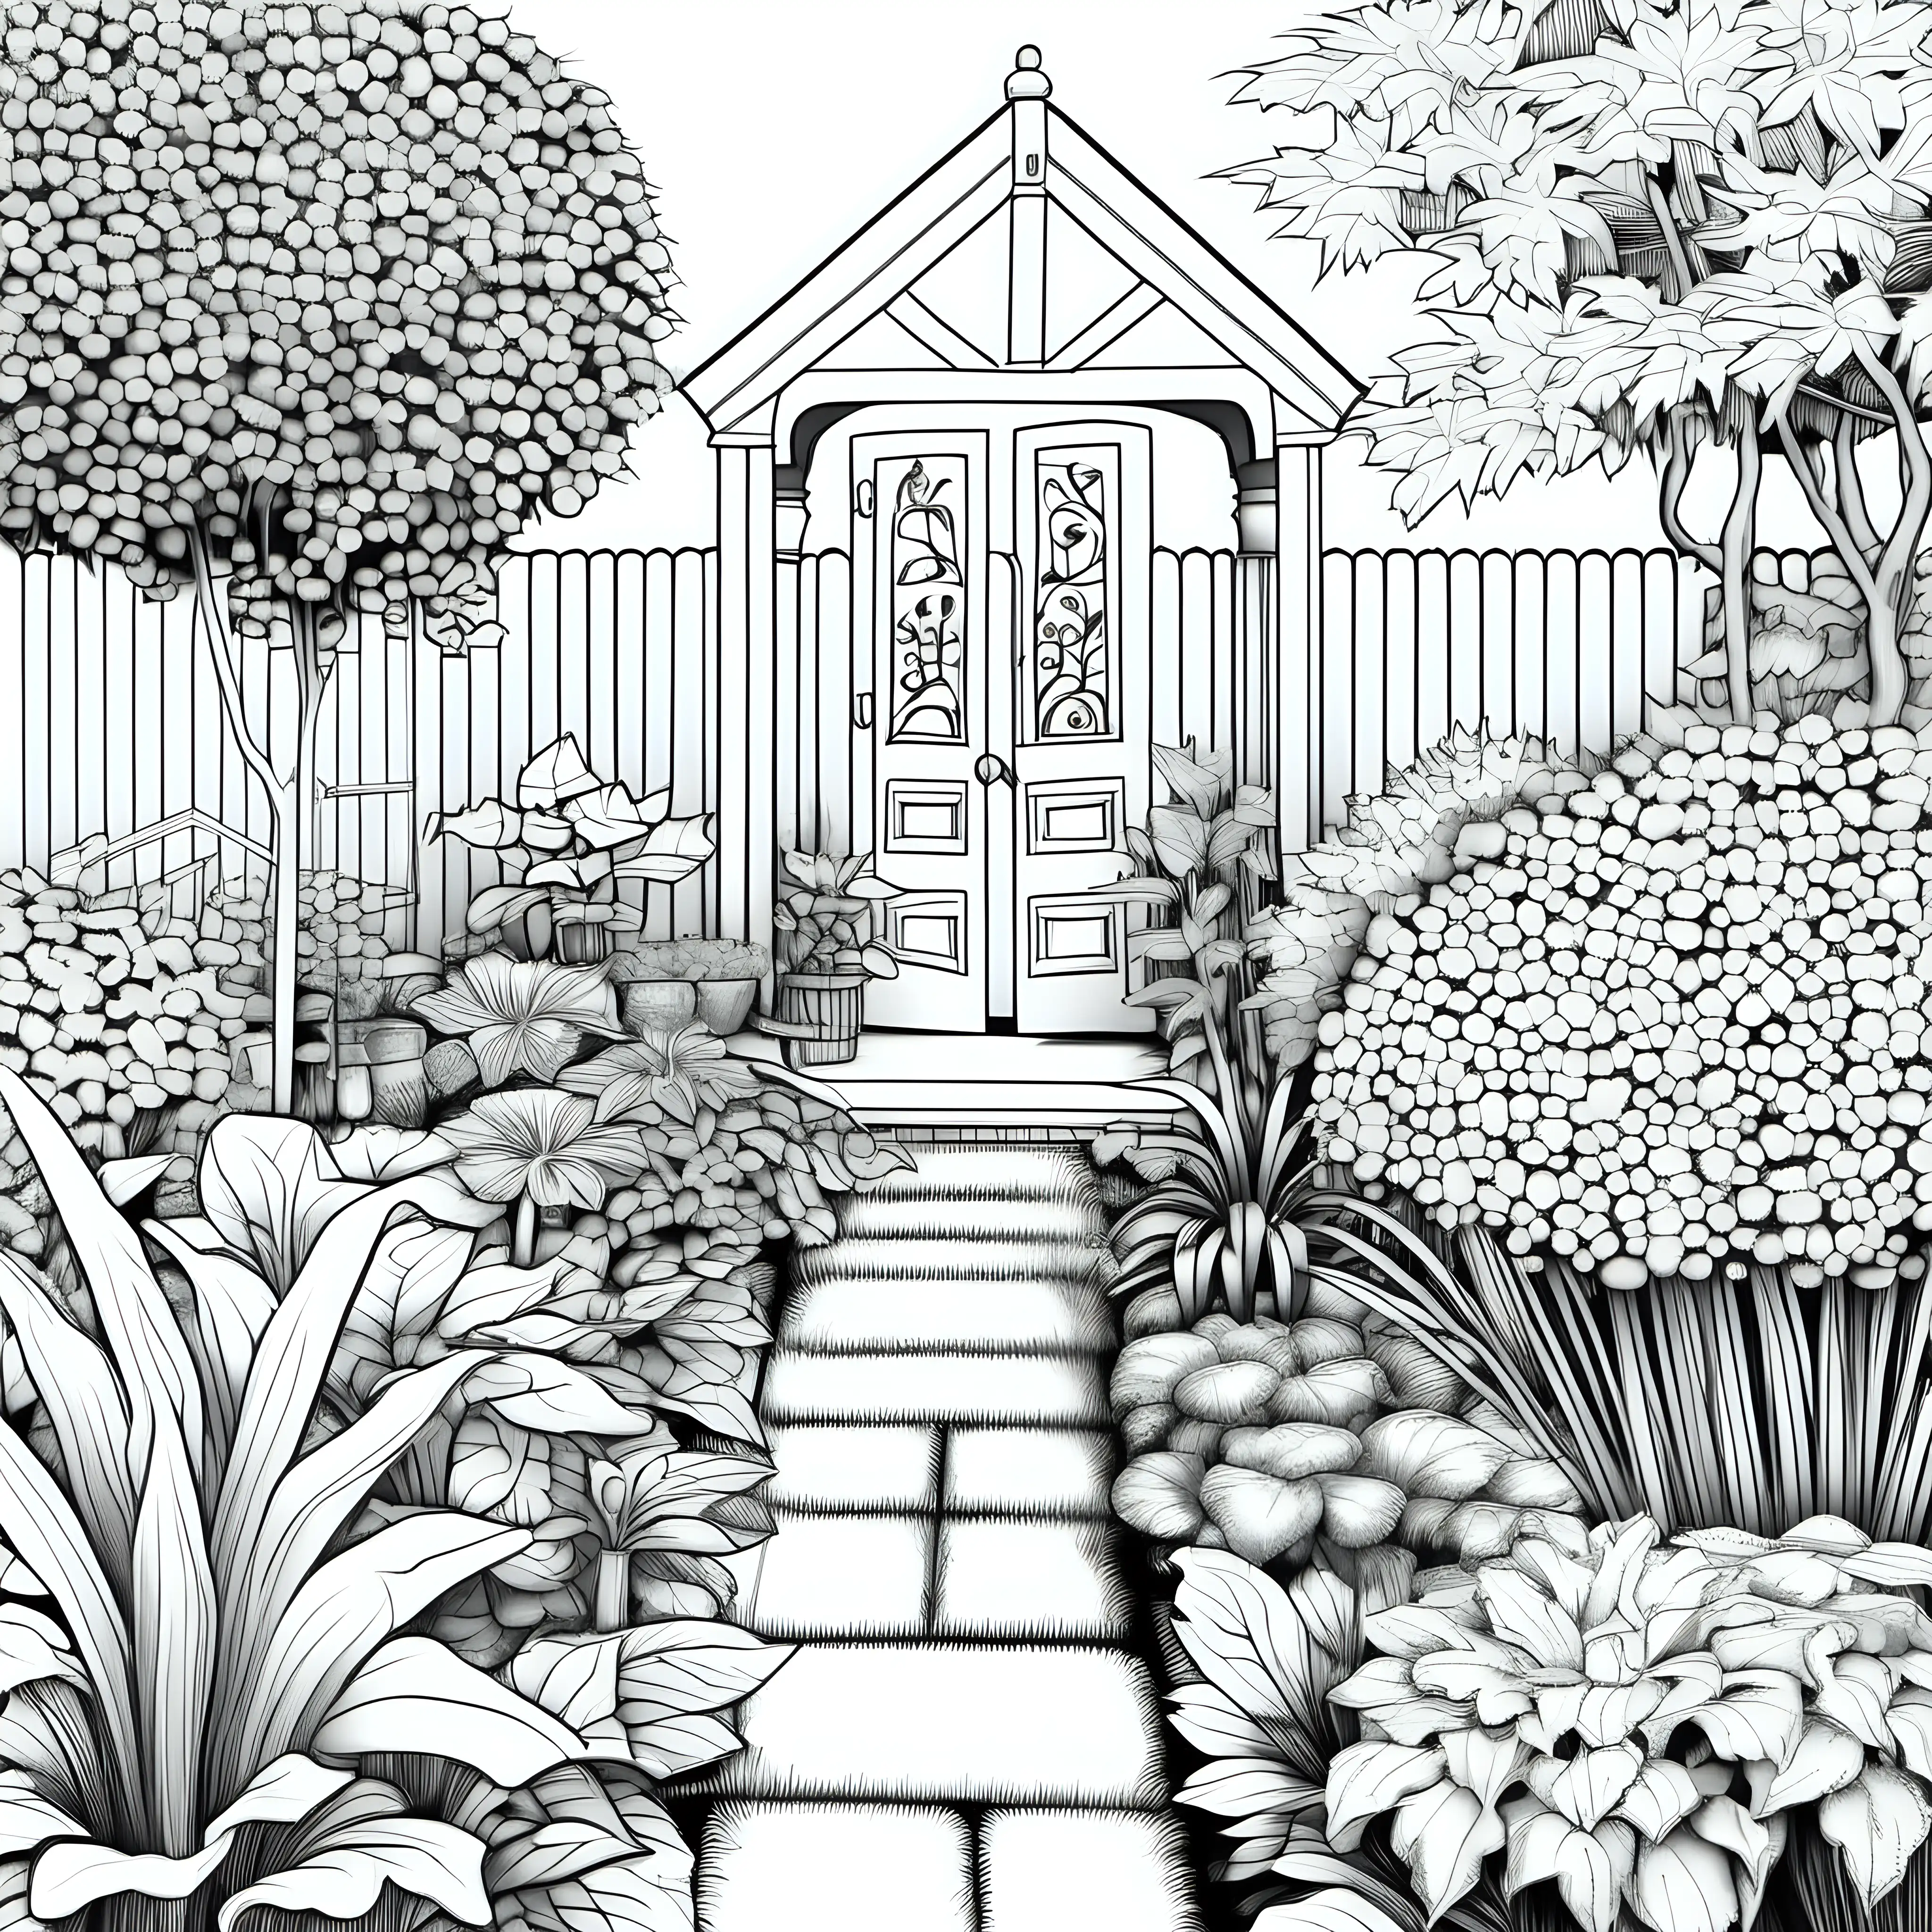 Vibrant Realistic Garden Coloring Page for Relaxation and Creativity